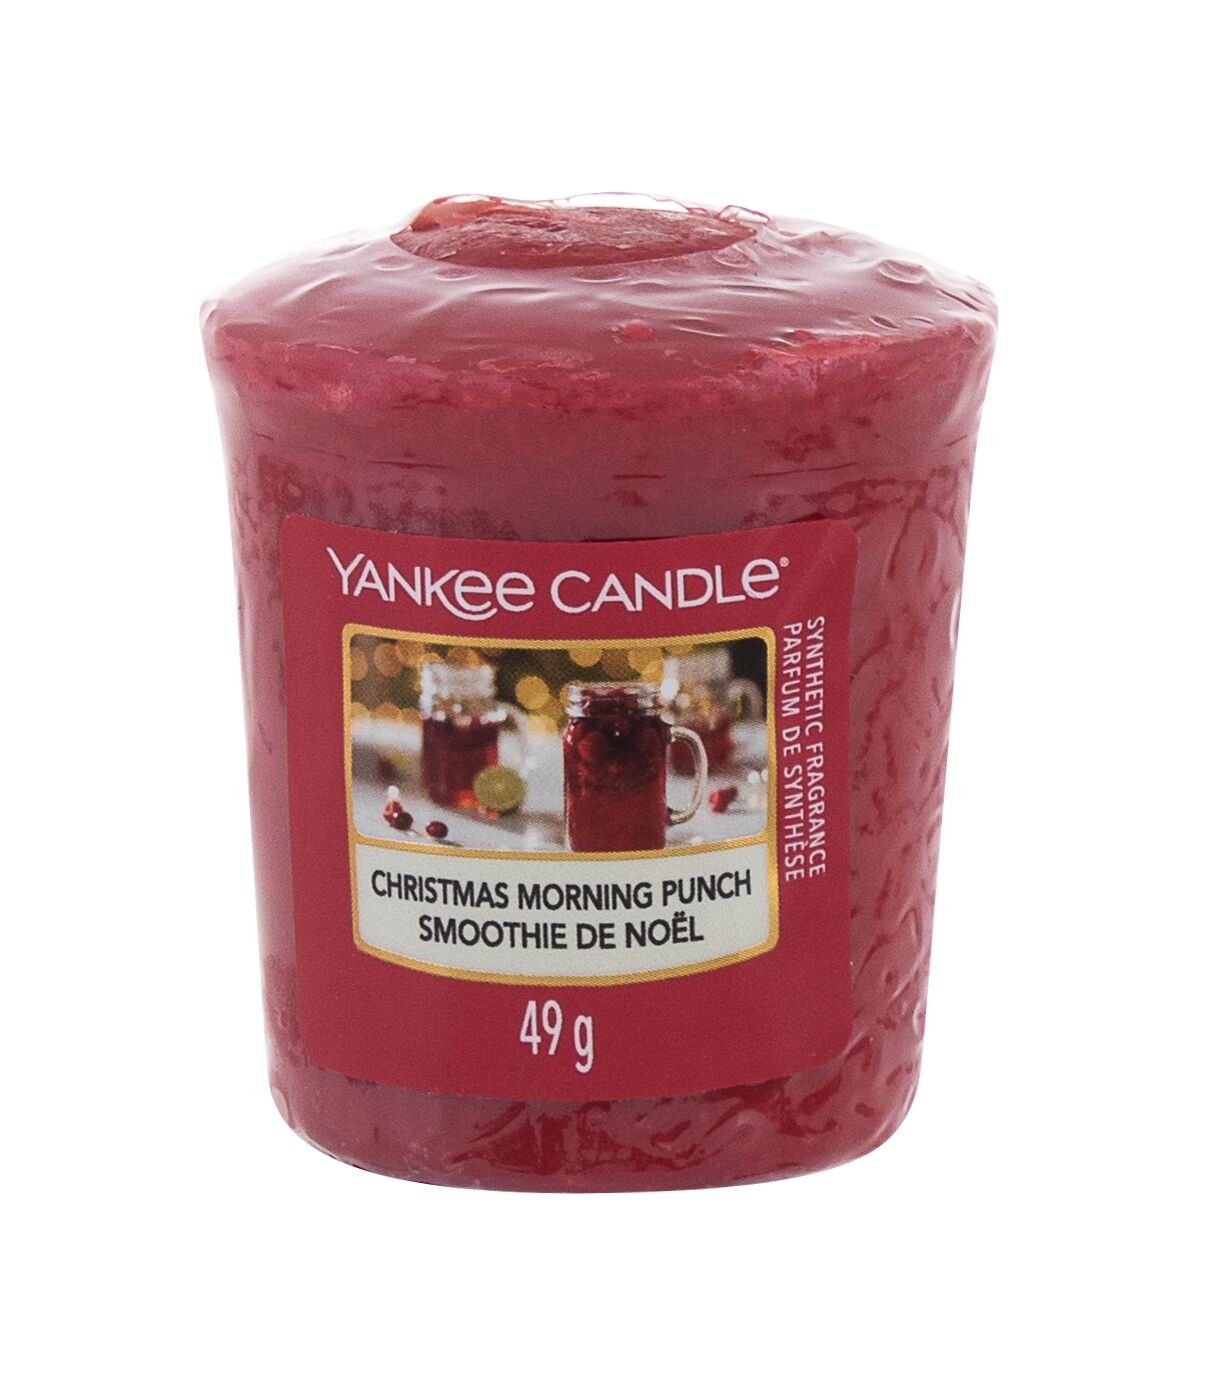 Yankee Candle Christmas Morning Punch